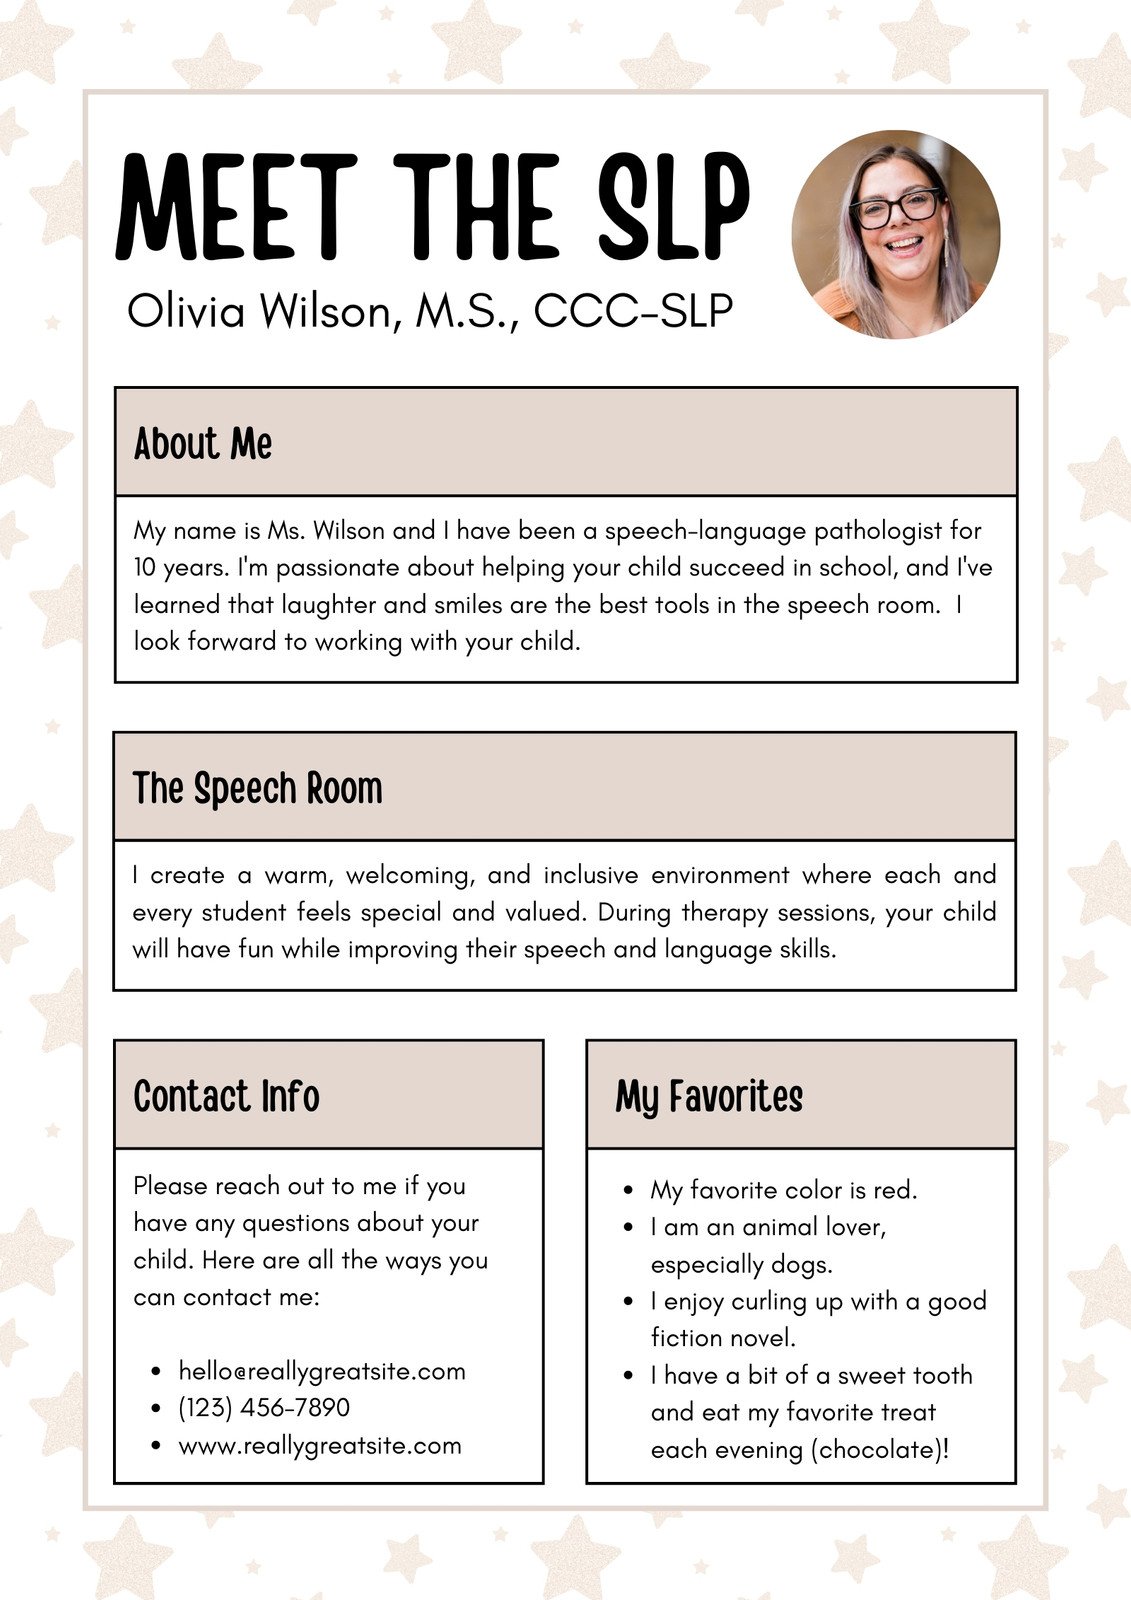 web page graphics for teachers